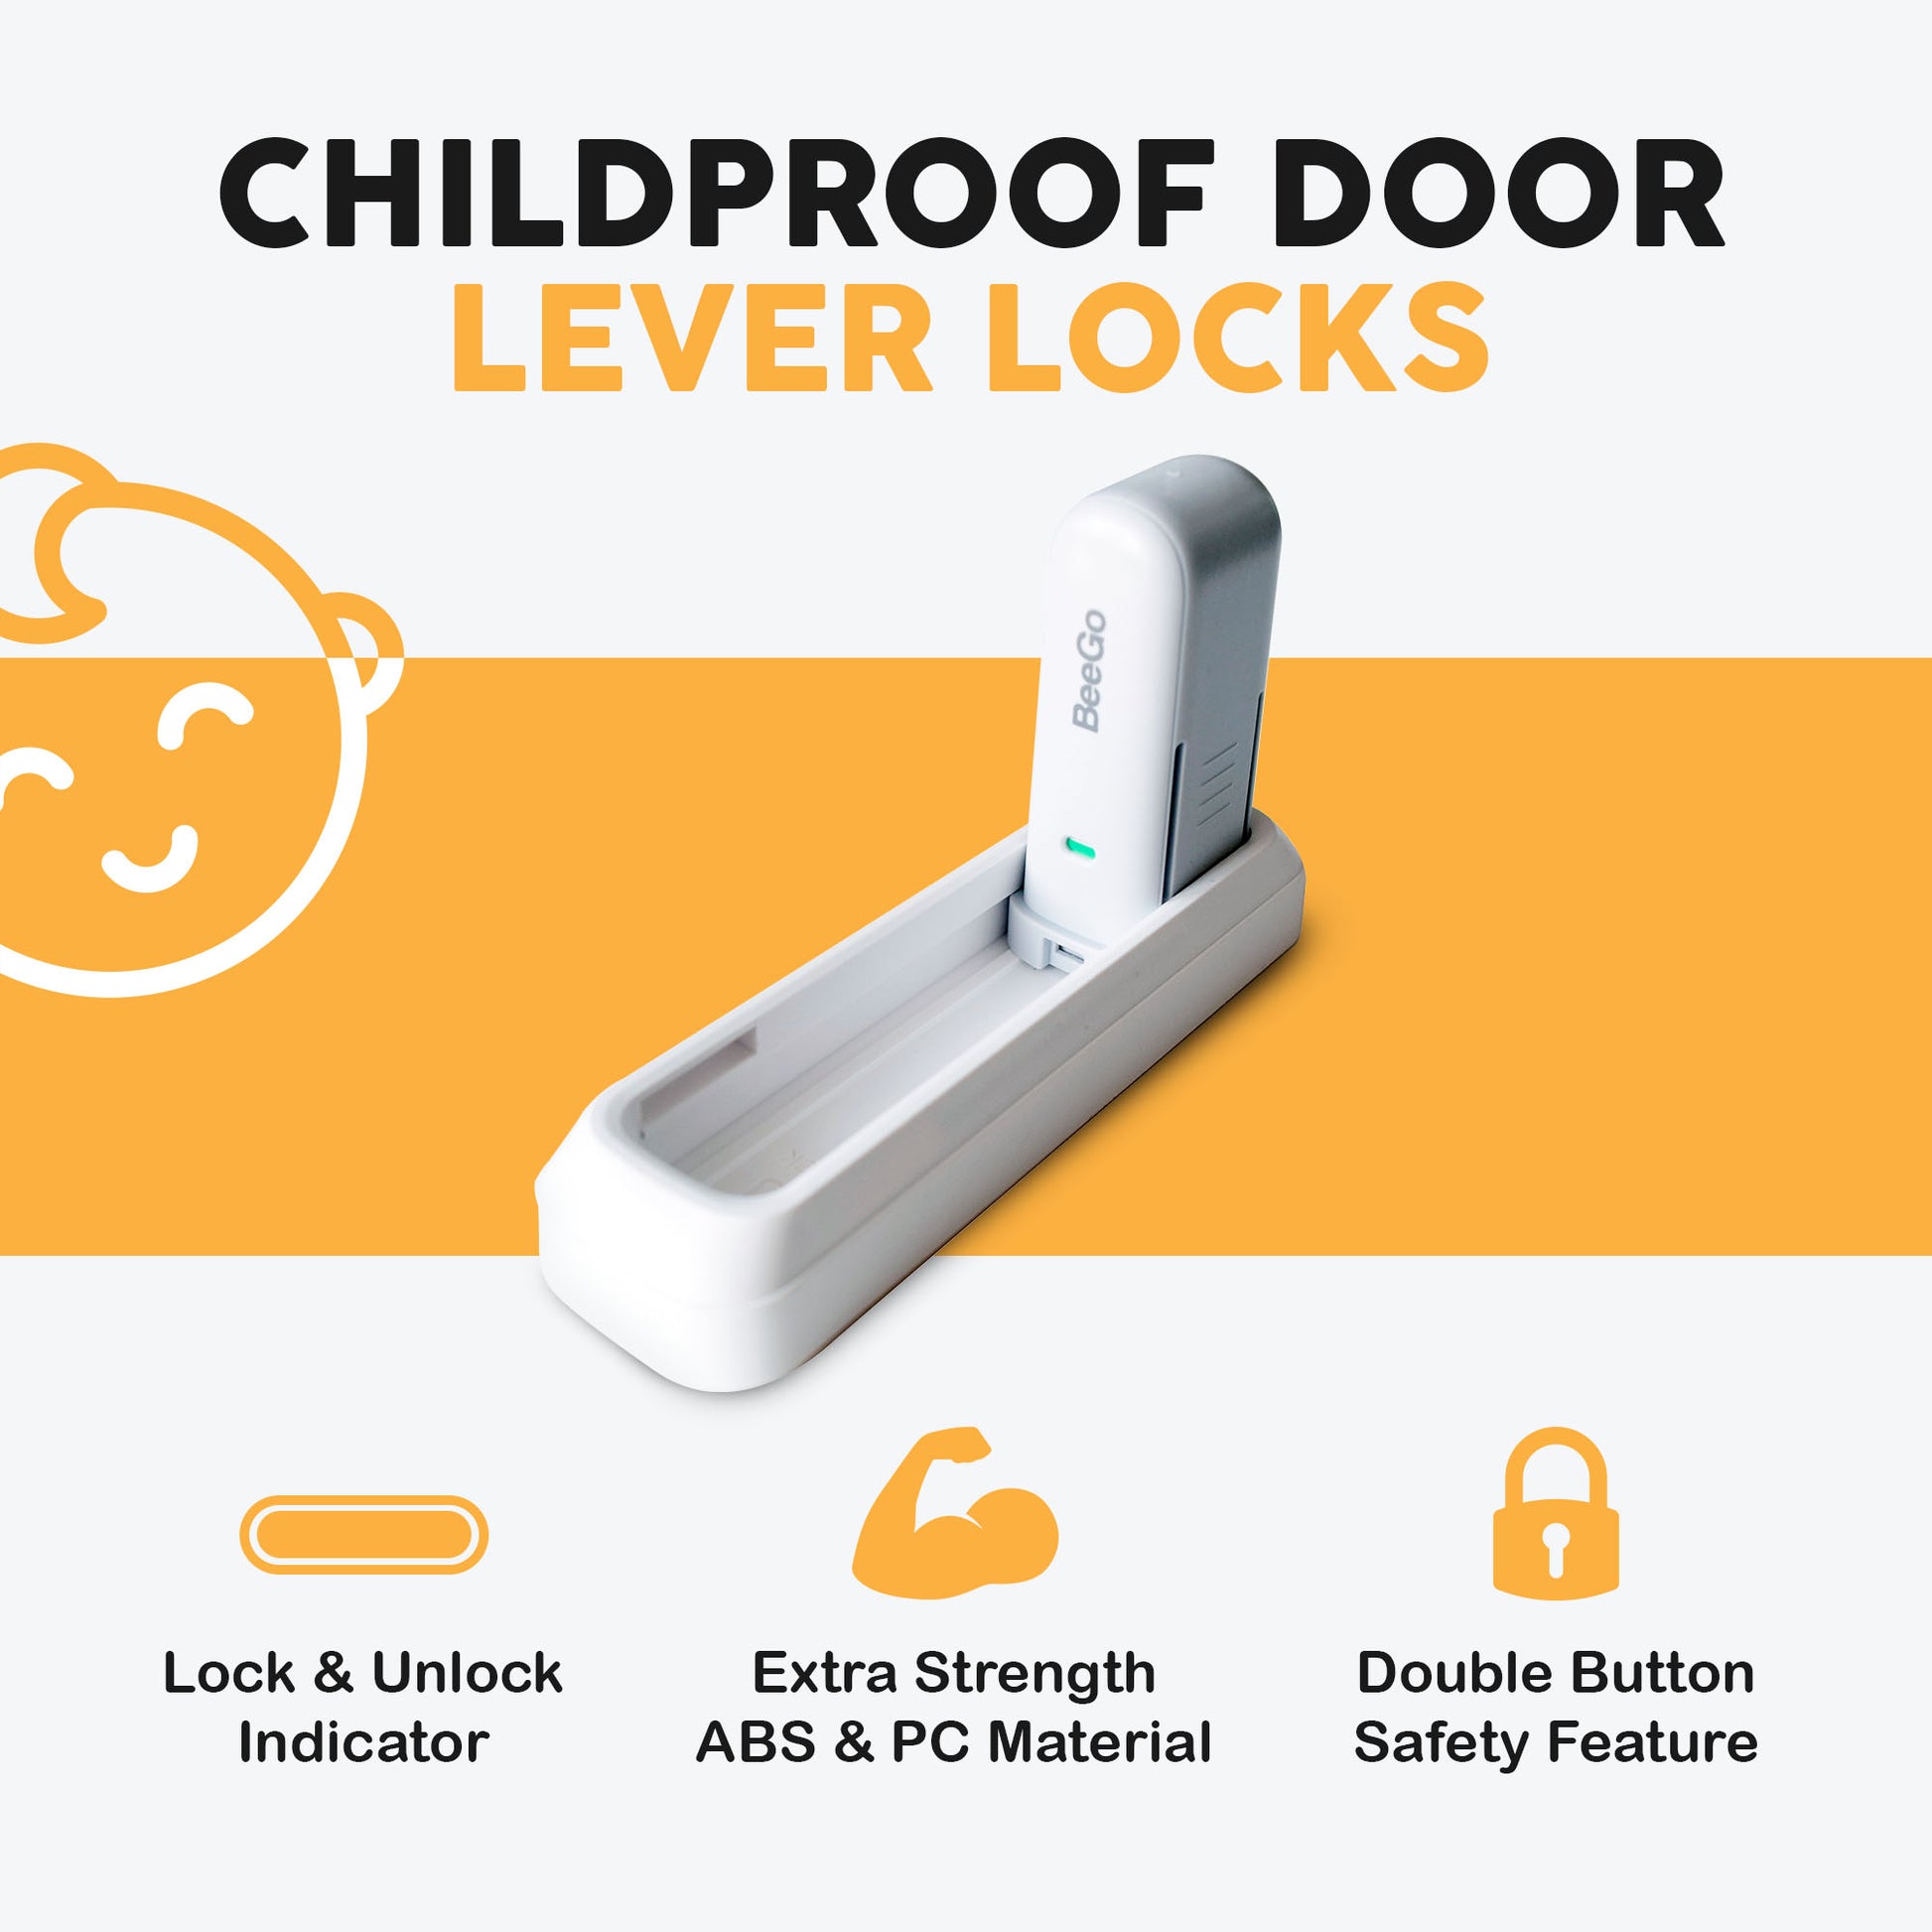 Upgraded Childproof Door Lever Lock Easy To Use As Door Lever Safety Locks  For Children And Pets With Extra Strong 3m Vhb No Tools, One Hand Operation